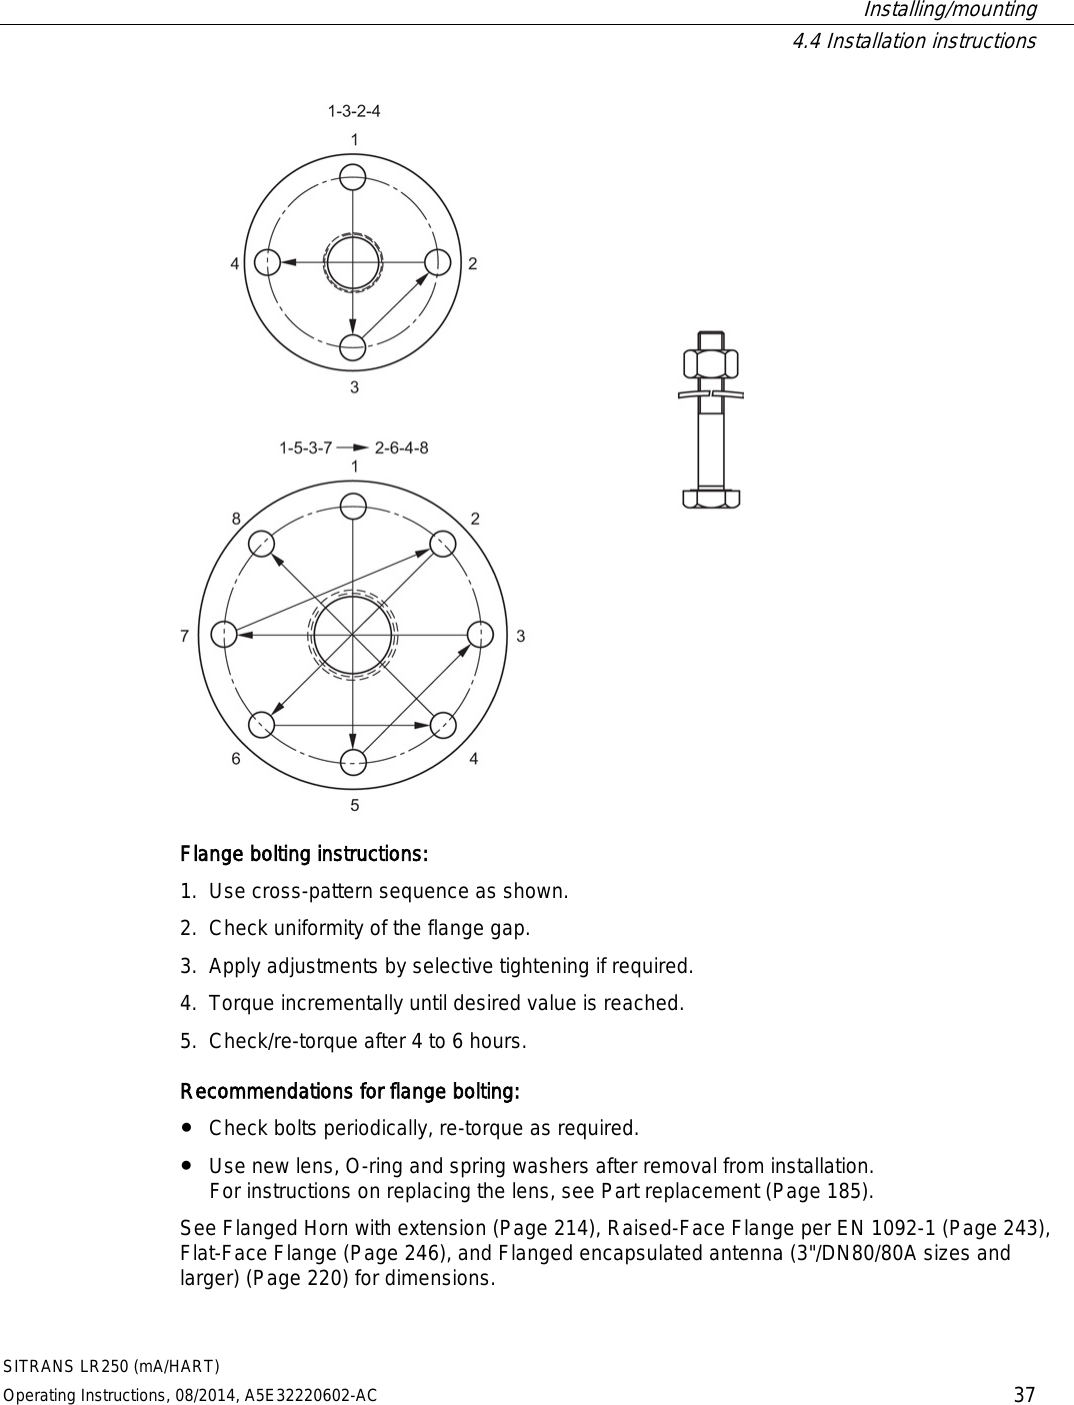  Installing/mounting  4.4 Installation instructions SITRANS LR250 (mA/HART) Operating Instructions, 08/2014, A5E32220602-AC 37  Flange bolting instructions: 1. Use cross-pattern sequence as shown. 2. Check uniformity of the flange gap. 3. Apply adjustments by selective tightening if required. 4. Torque incrementally until desired value is reached. 5. Check/re-torque after 4 to 6 hours. Recommendations for flange bolting: ● Check bolts periodically, re-torque as required. ● Use new lens, O-ring and spring washers after removal from installation.  For instructions on replacing the lens, see Part replacement (Page 185). See Flanged Horn with extension (Page 214), Raised-Face Flange per EN 1092-1 (Page 243), Flat-Face Flange (Page 246), and Flanged encapsulated antenna (3&quot;/DN80/80A sizes and larger) (Page 220) for dimensions. 